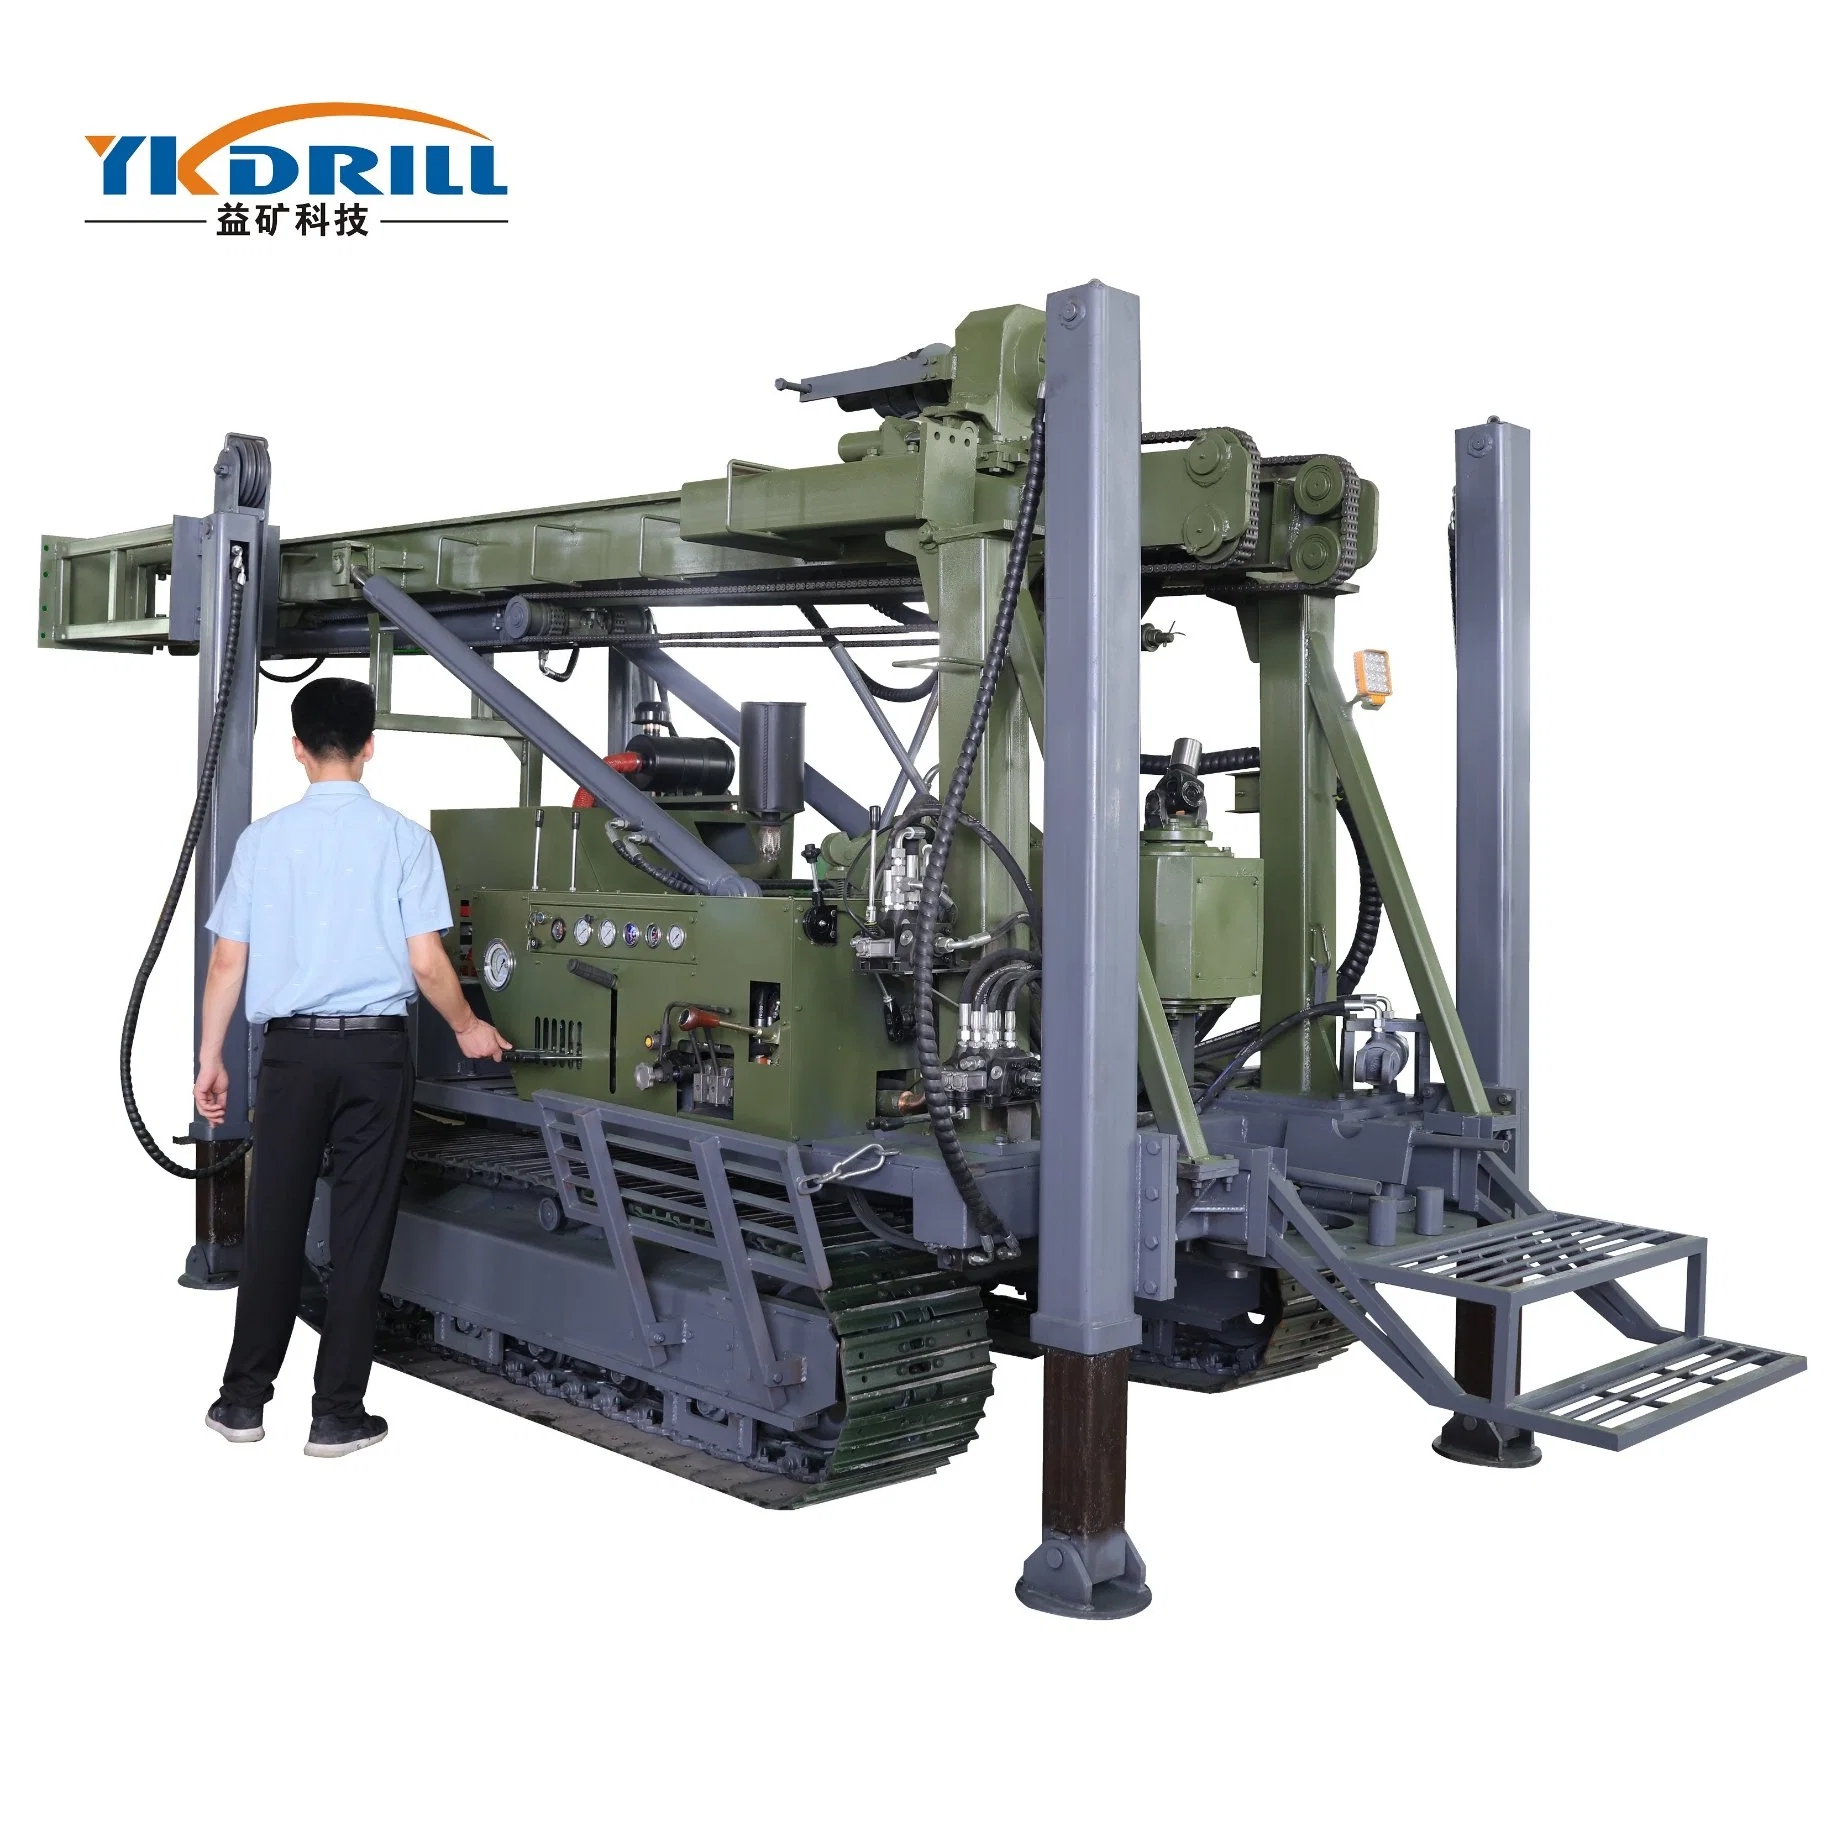 Hot Selling Top Drive Small Portable Borehole Drilling Machines/Water Well Drilling Equipment